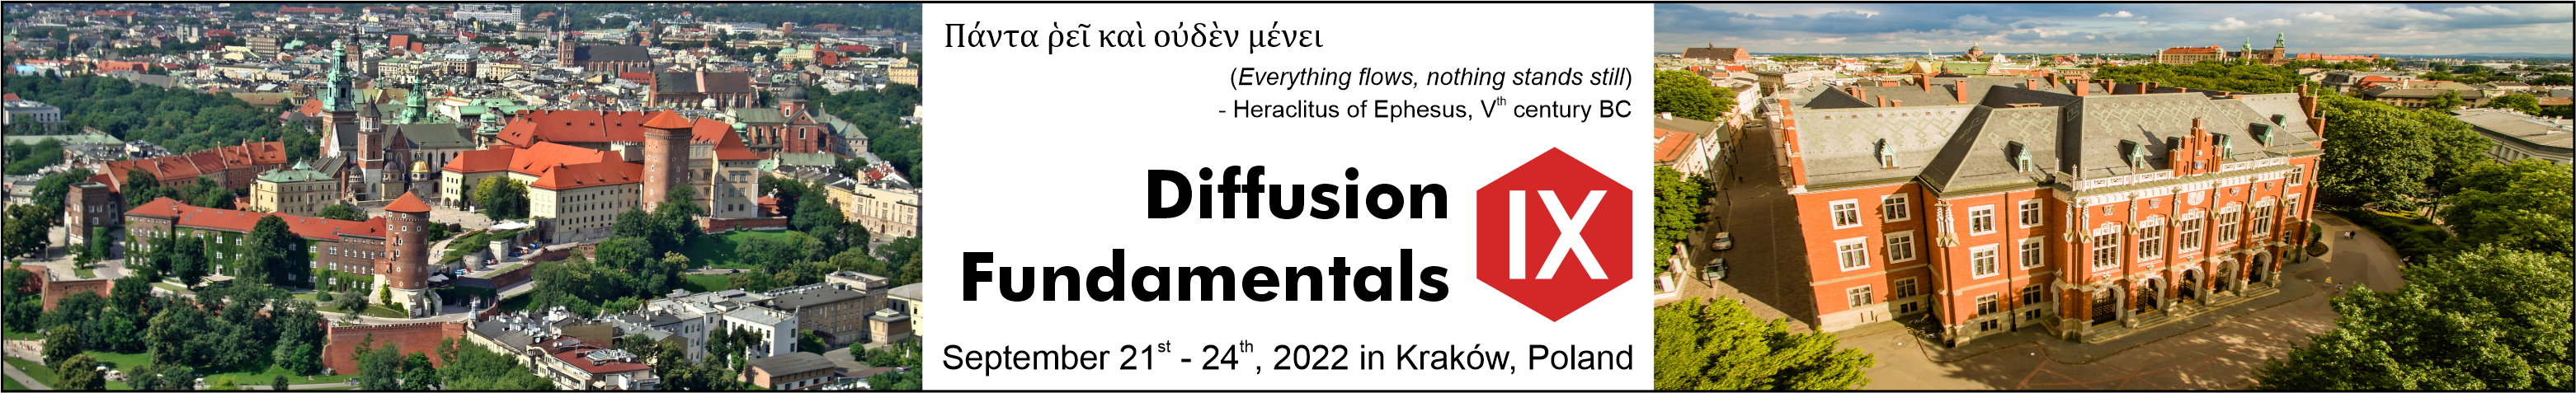 Diffusion Fundamentals conference logo with motto, dates and photo of Wawel Castle and Collegium Novum